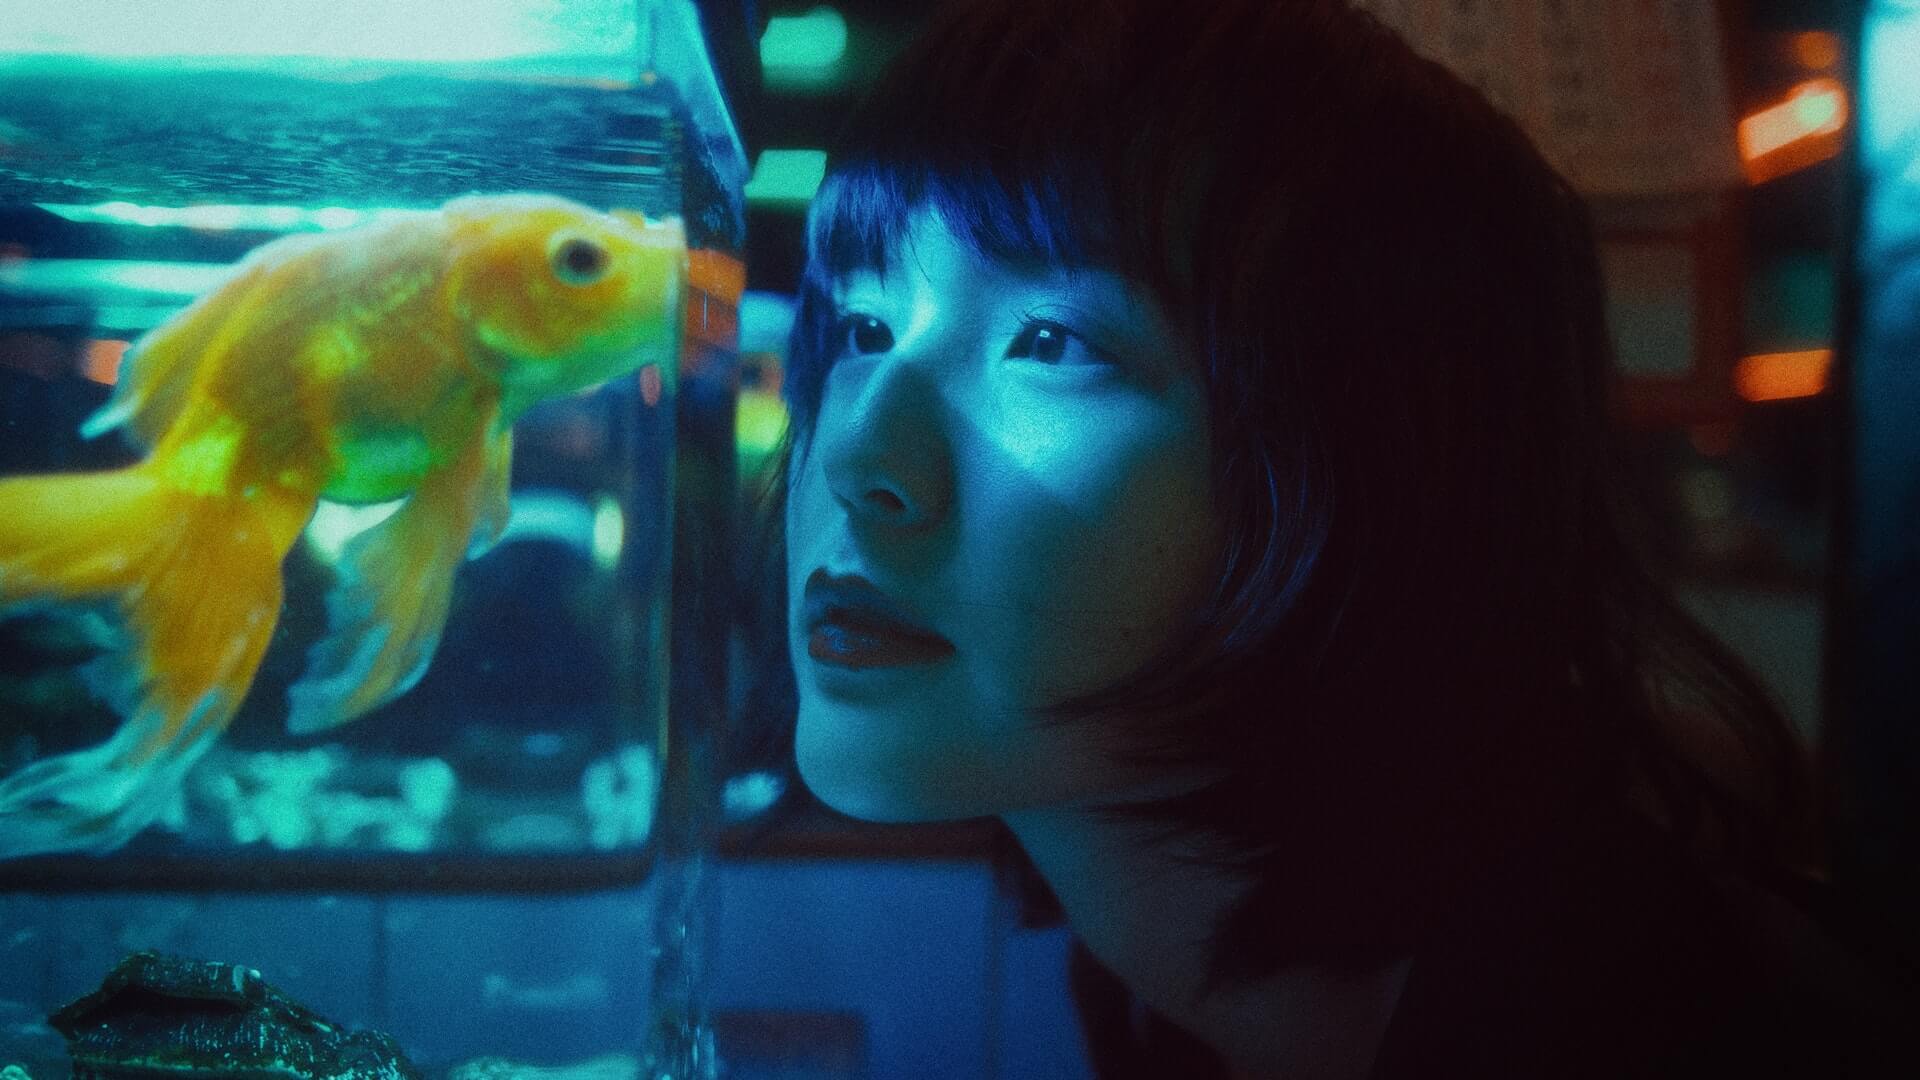 A talented lady is looking at a fish in an aquarium